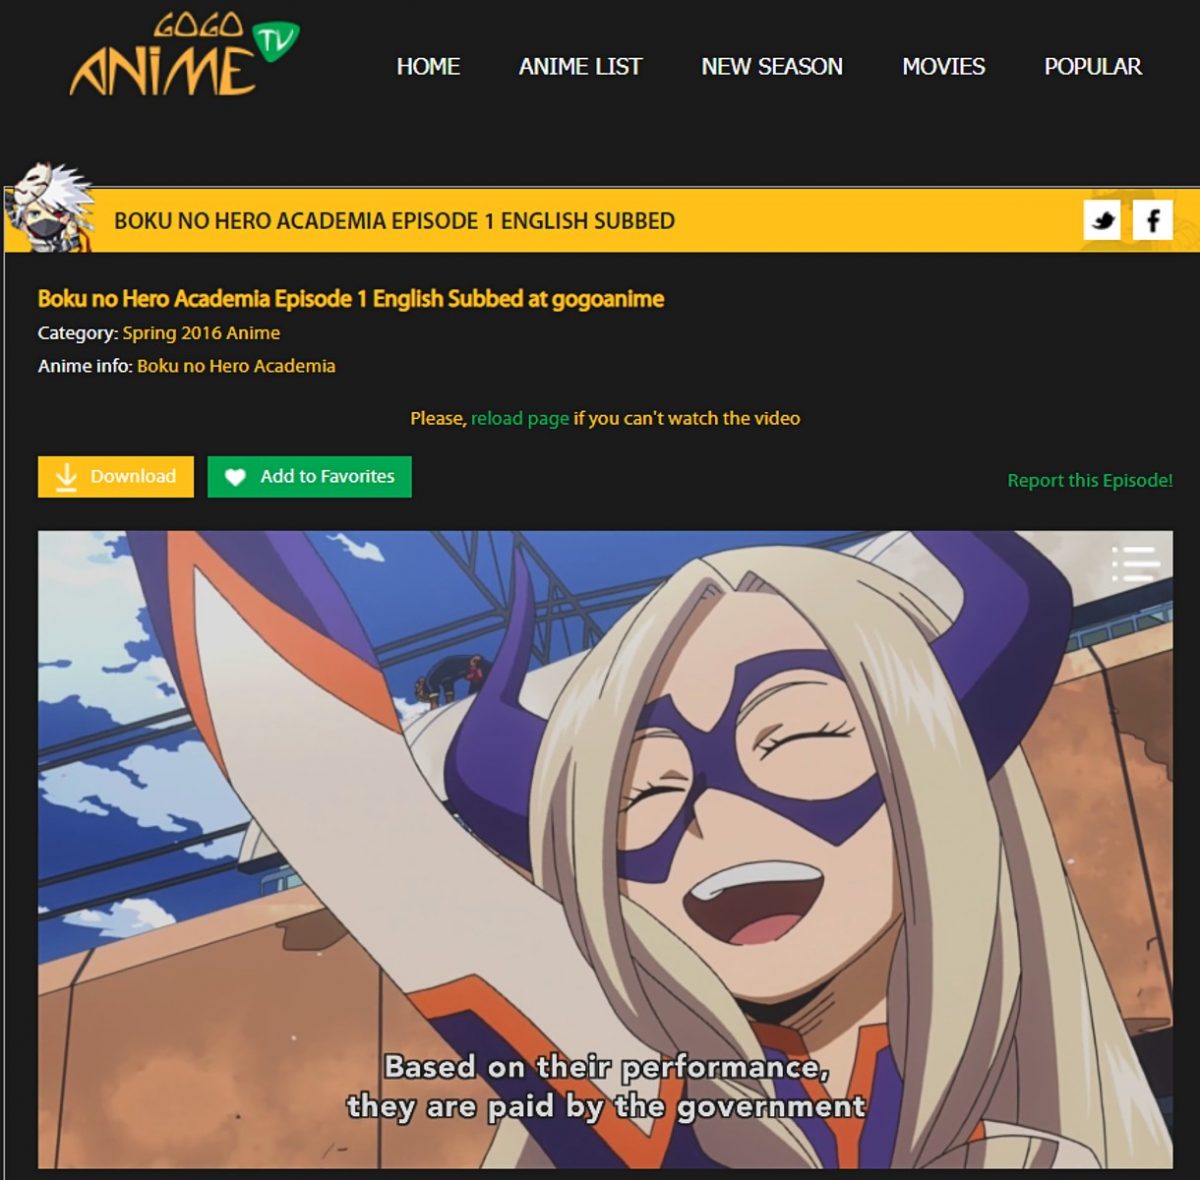 How to download anime from GogoAnime.